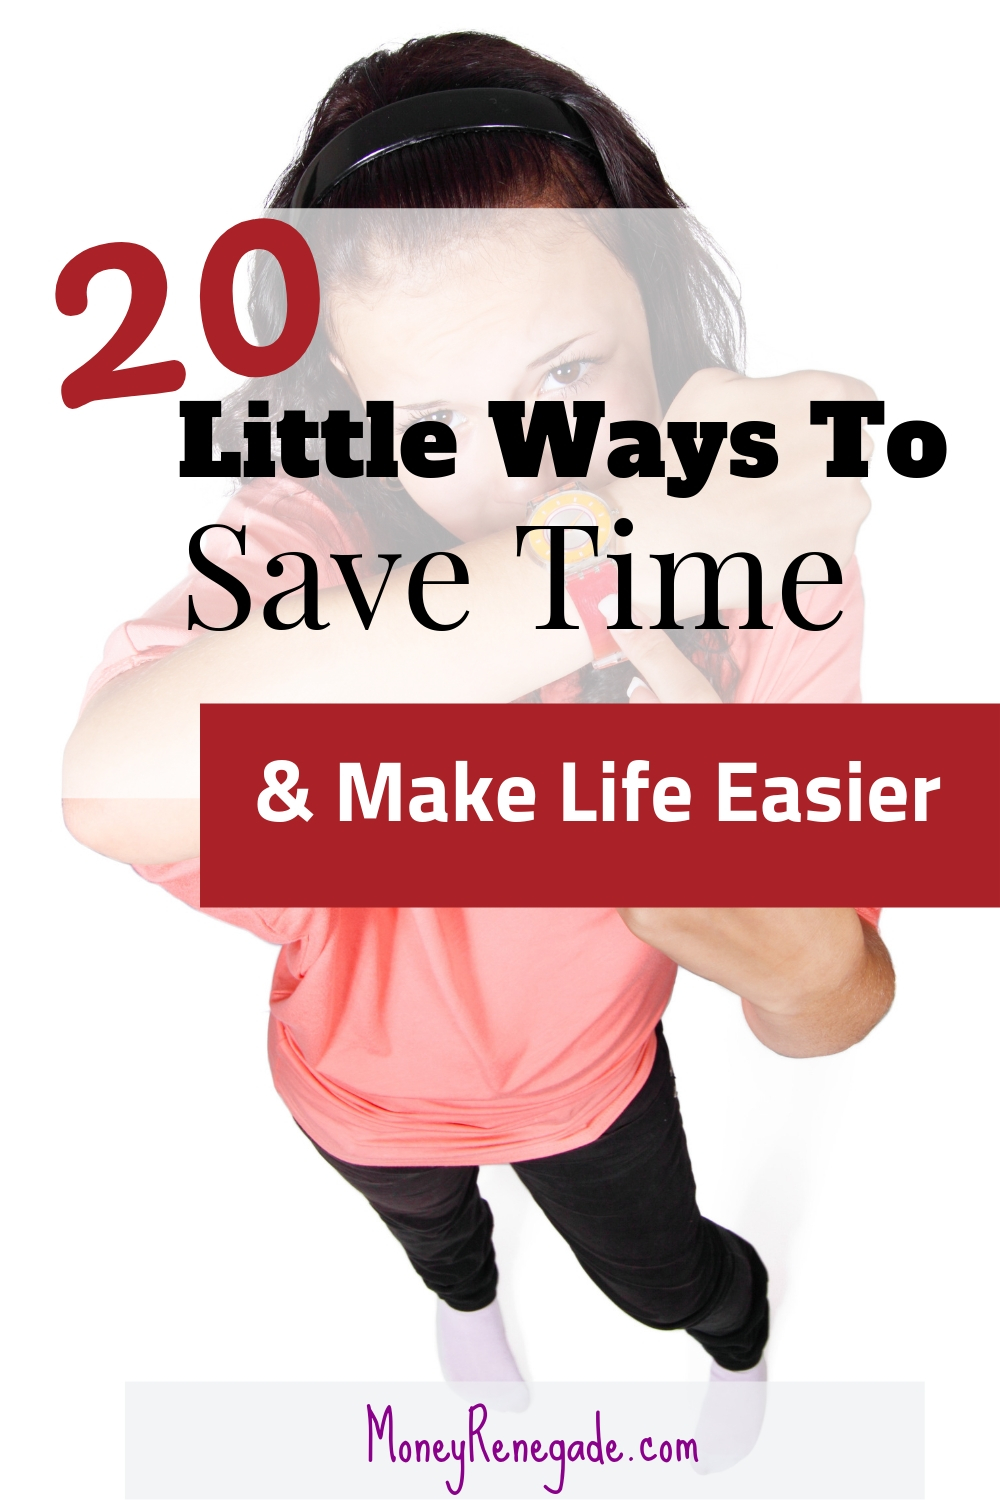 20 Little ways to save time everyday